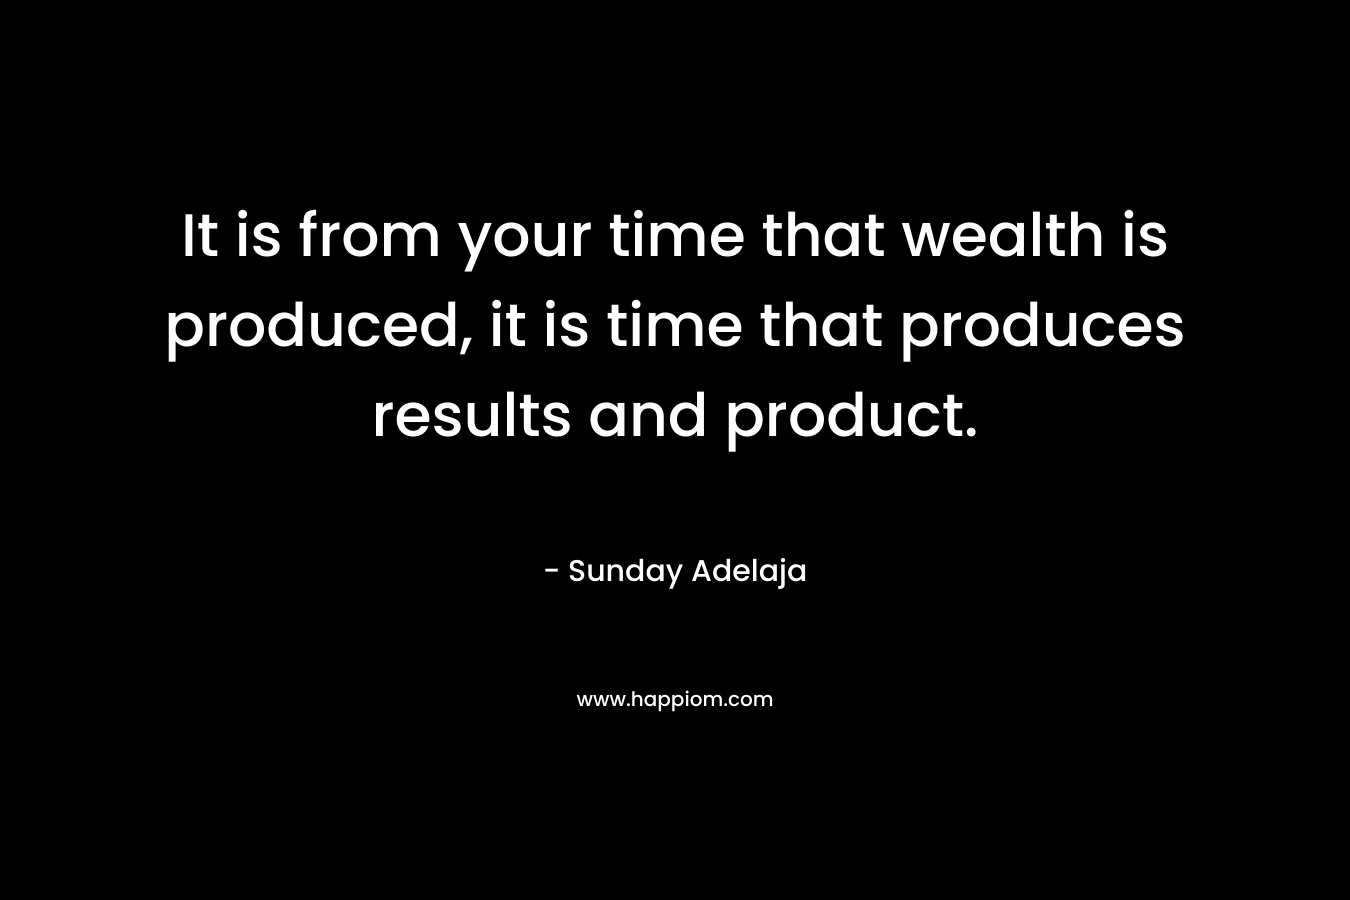 It is from your time that wealth is produced, it is time that produces results and product.